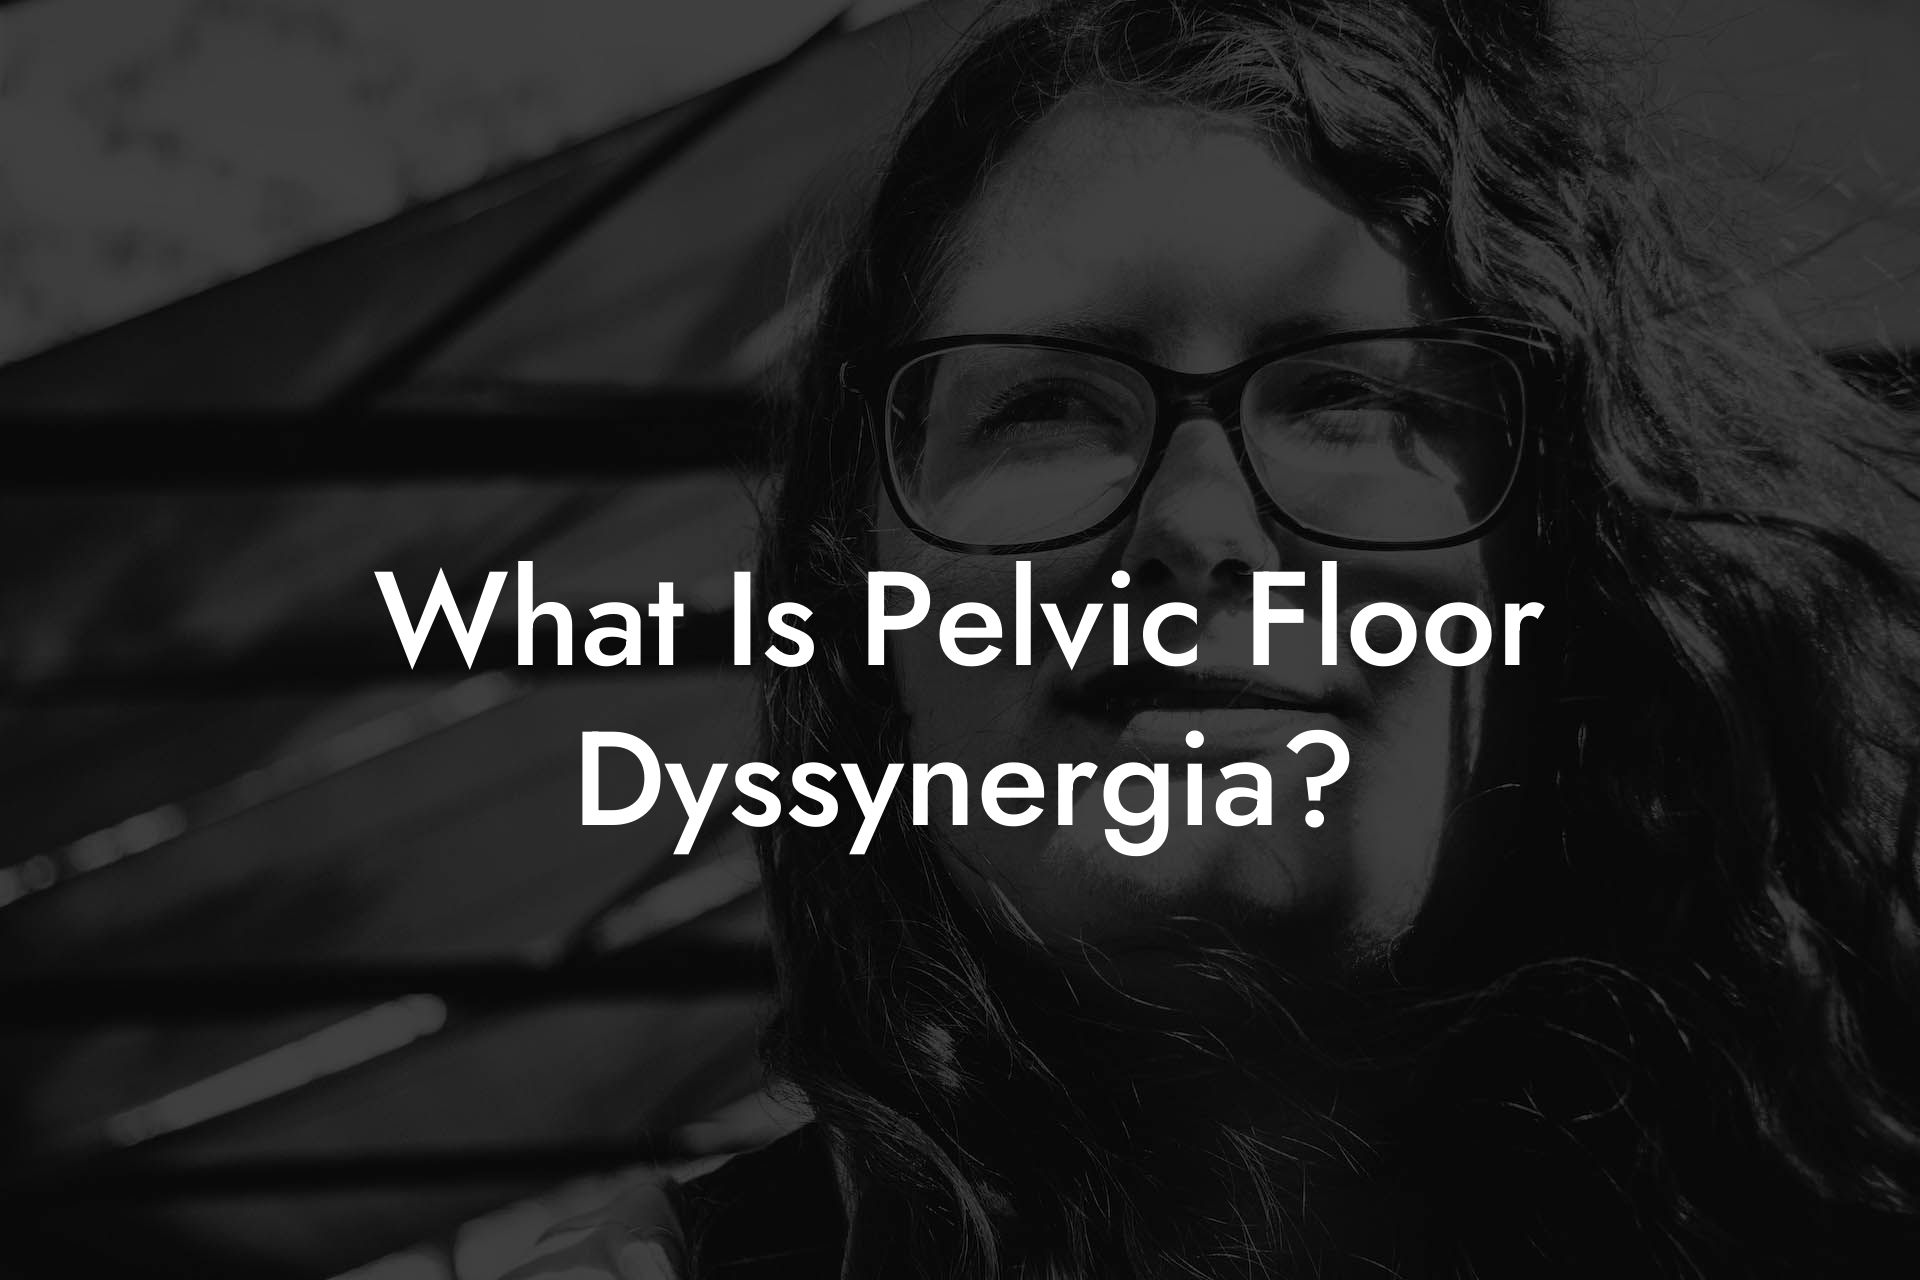 What Is Pelvic Floor Dyssynergia?